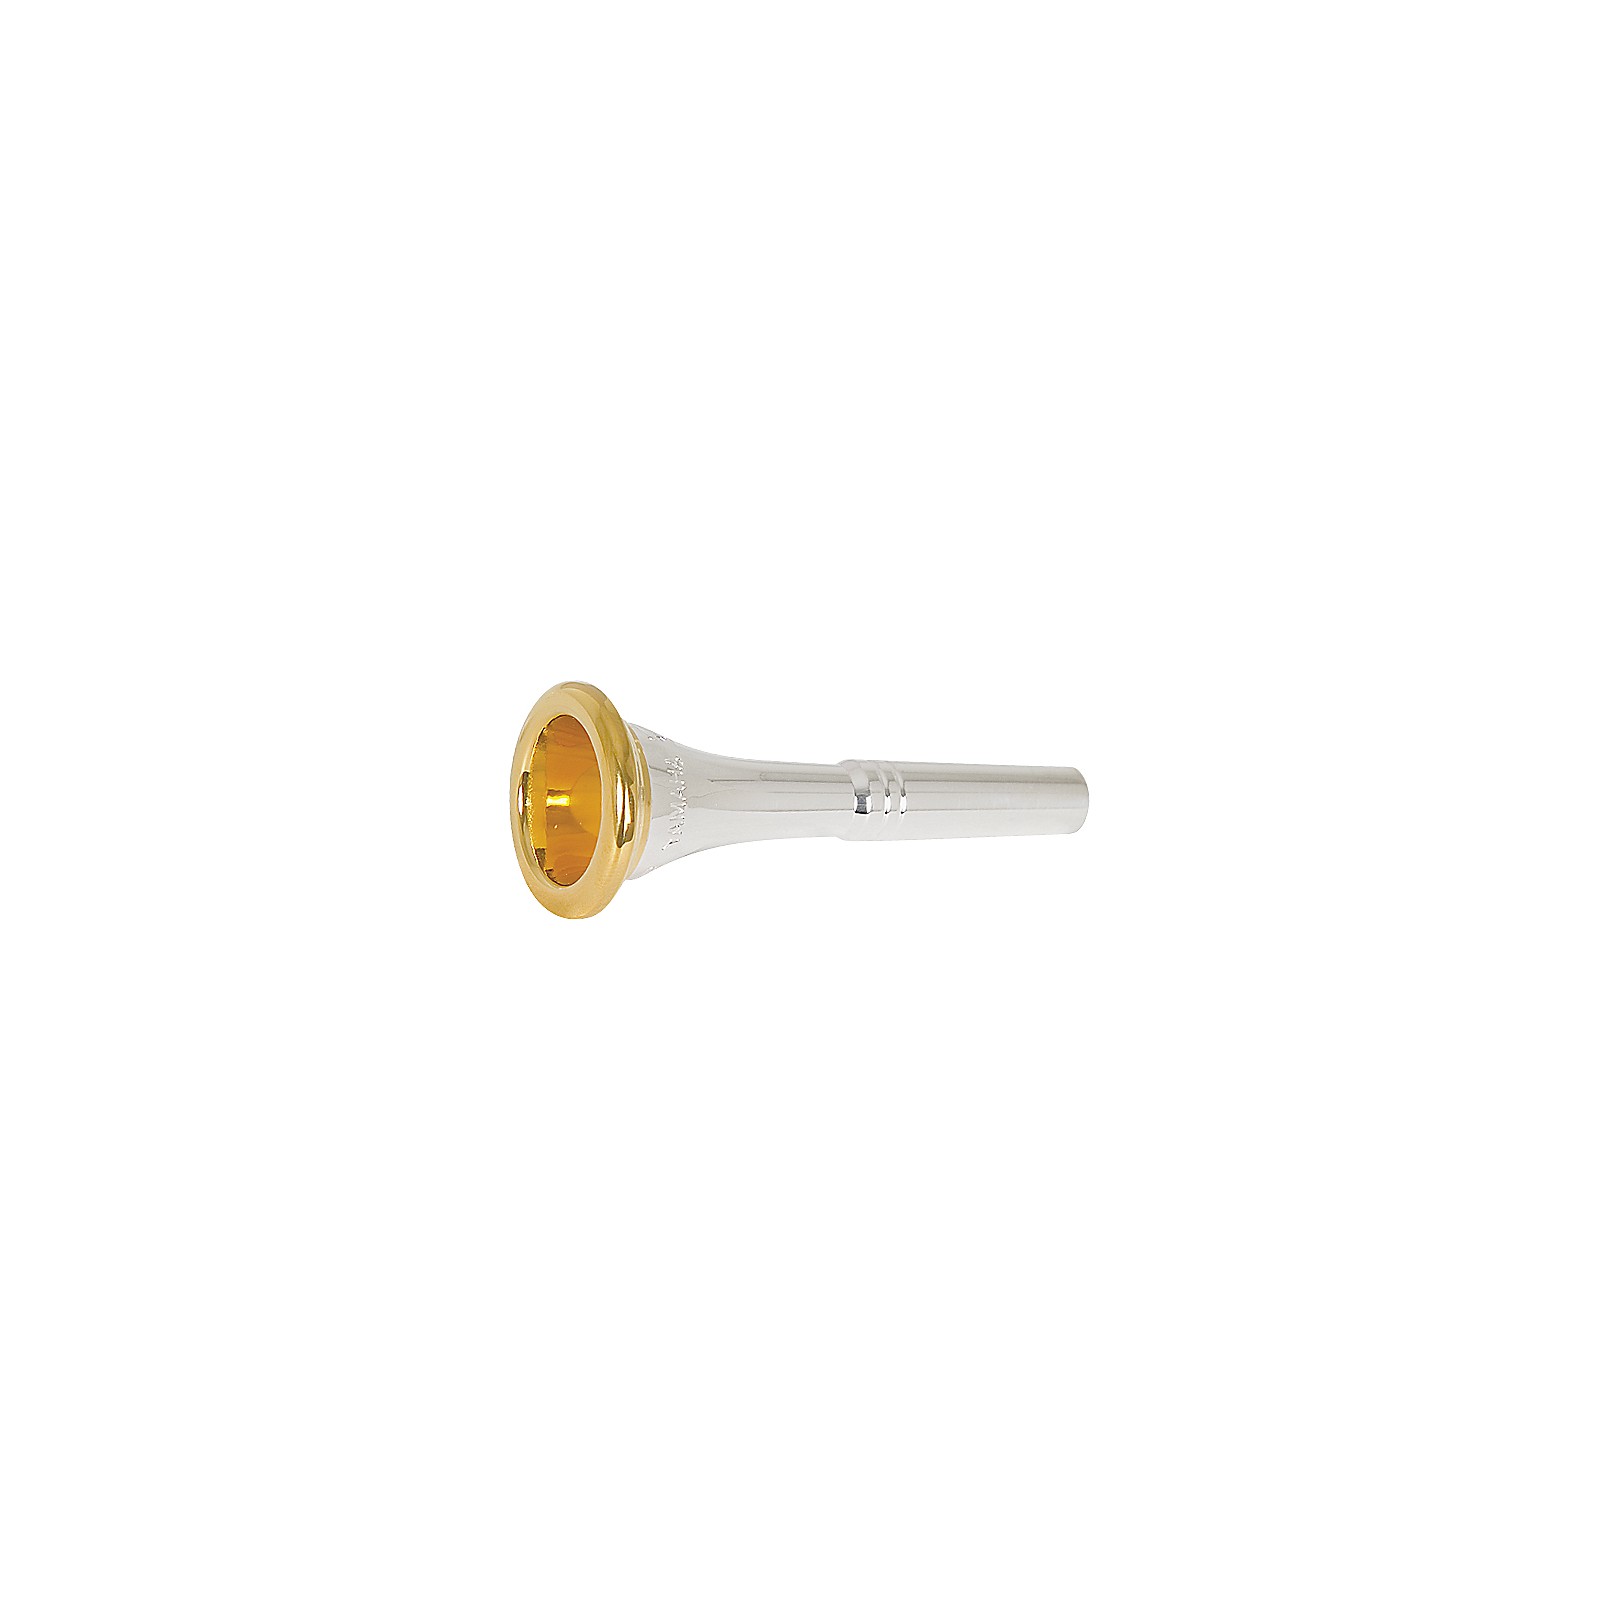 Yamaha French Horn Mouthpiece Gold-Plated Rim and Cup - Woodwind & Brasswind